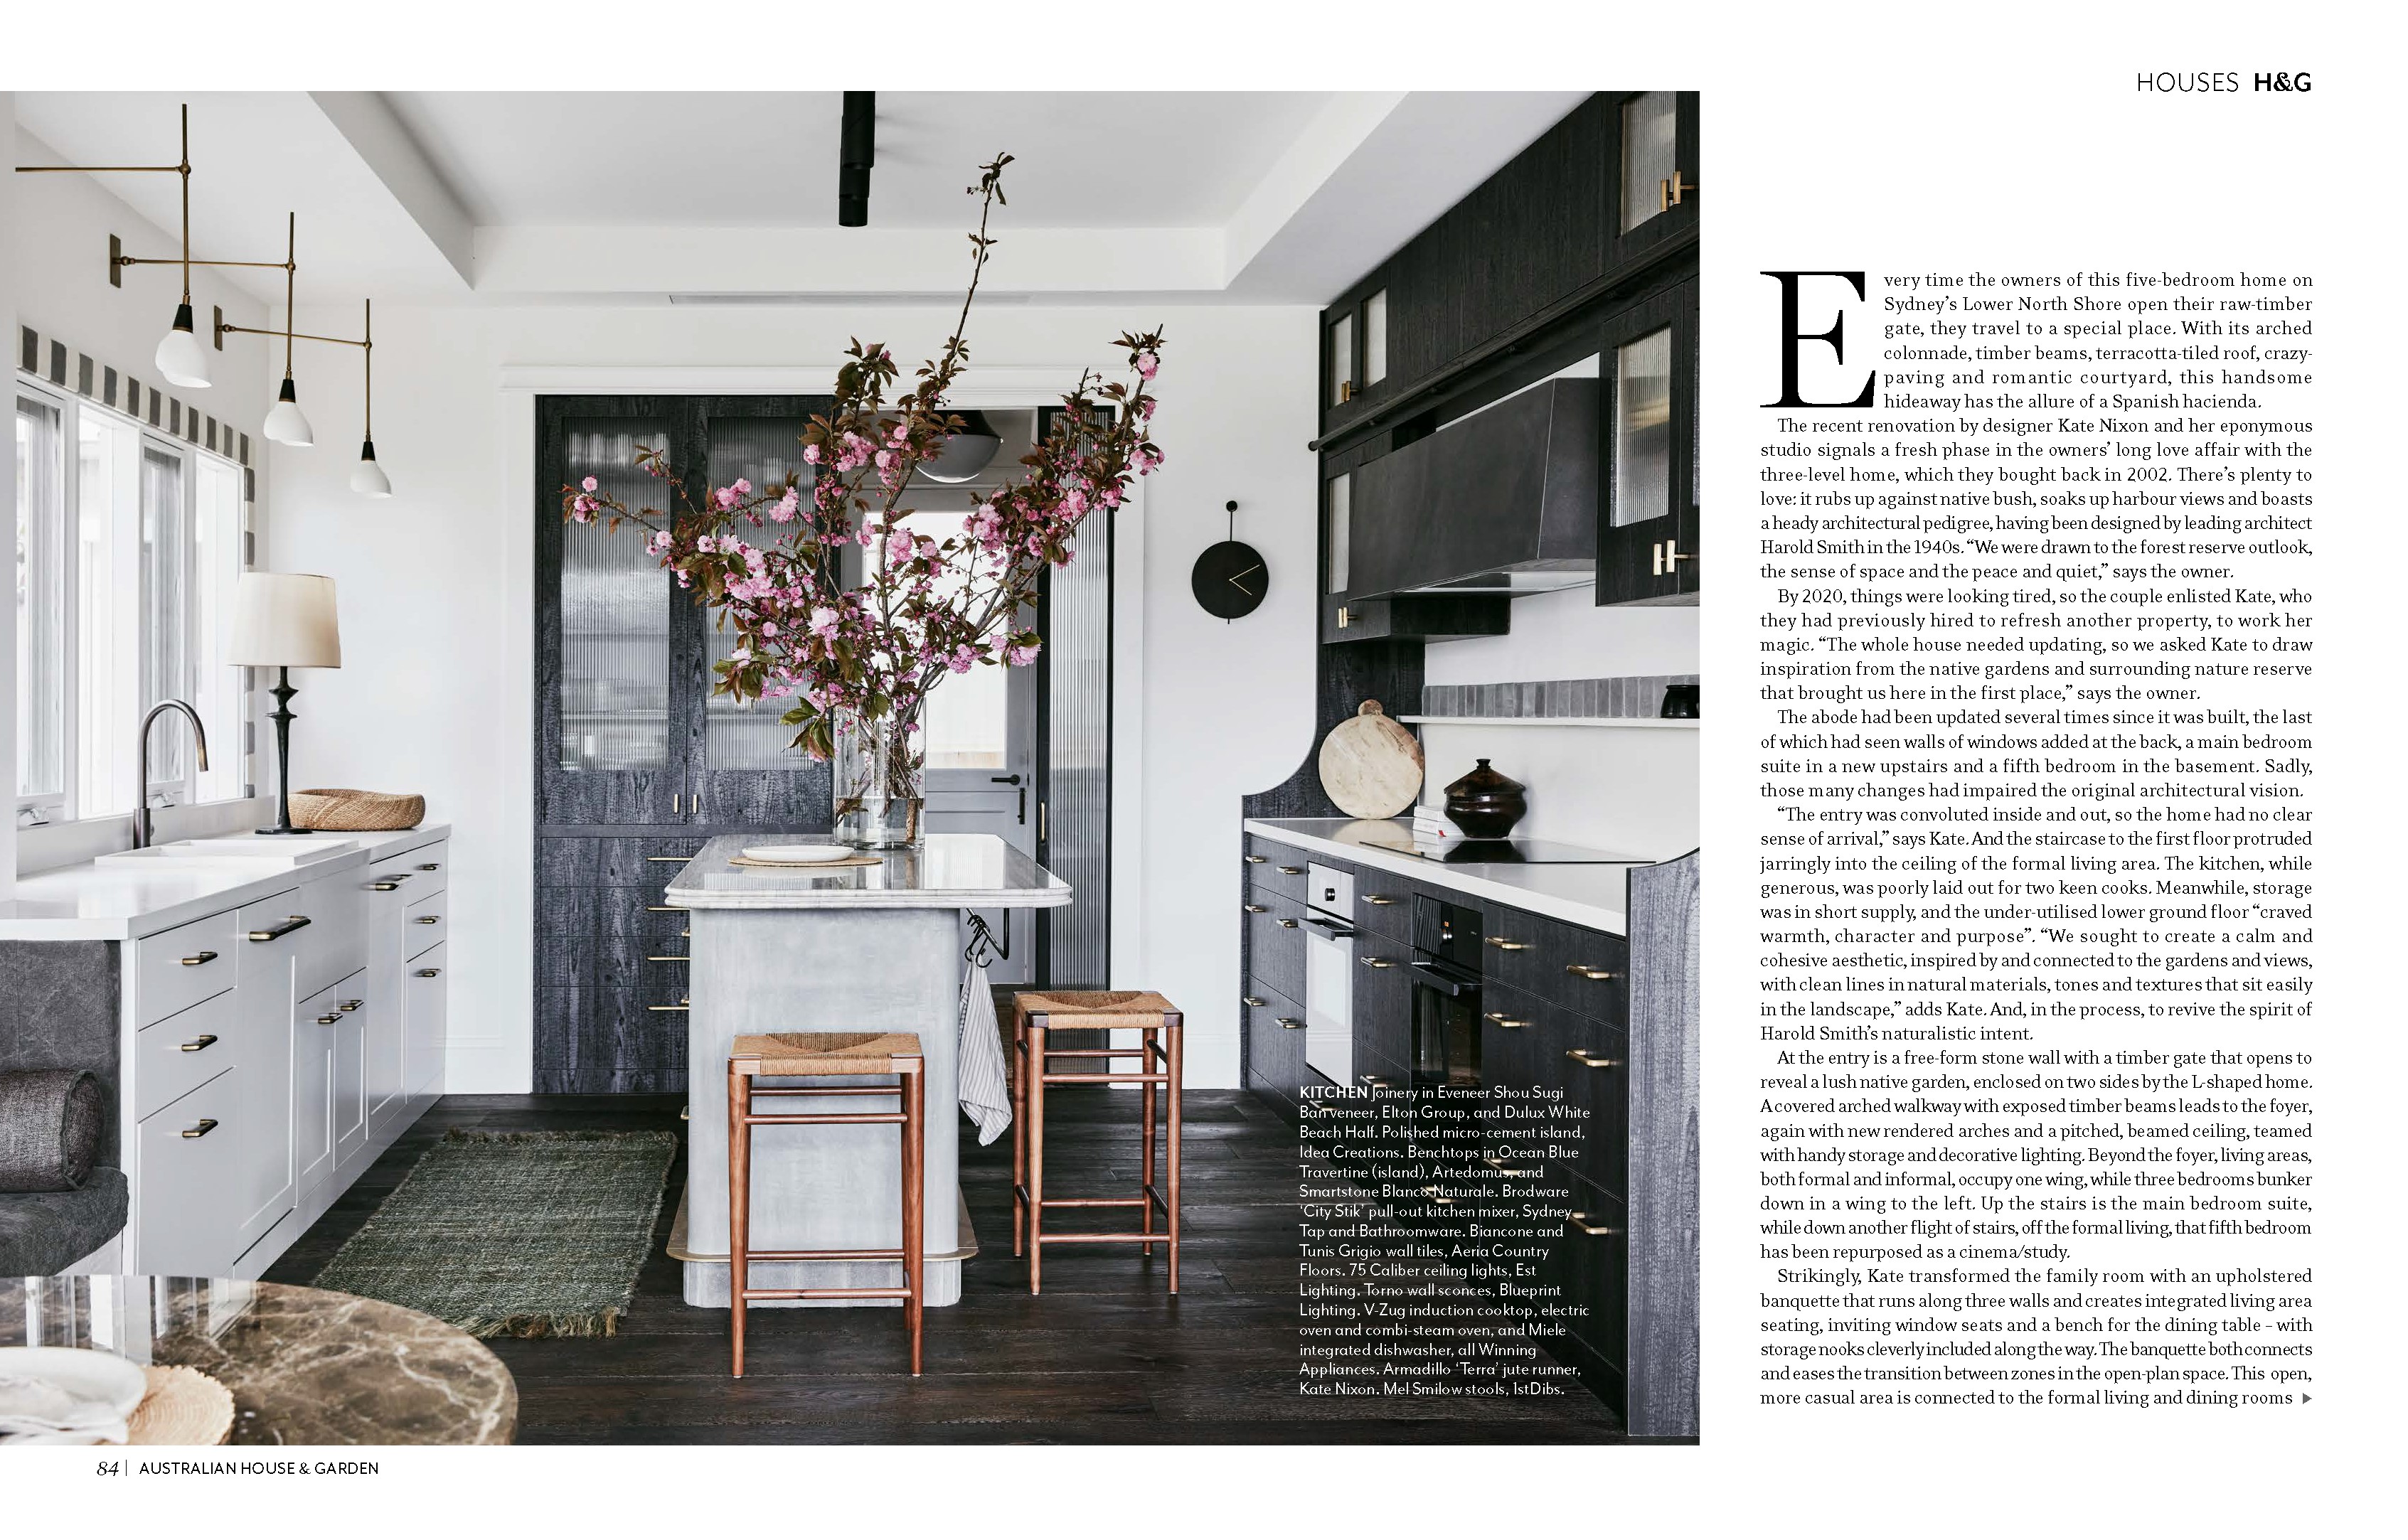 Kate Nixon's Sugarloaf project featured in House and Garden Magazine - Page 3-4